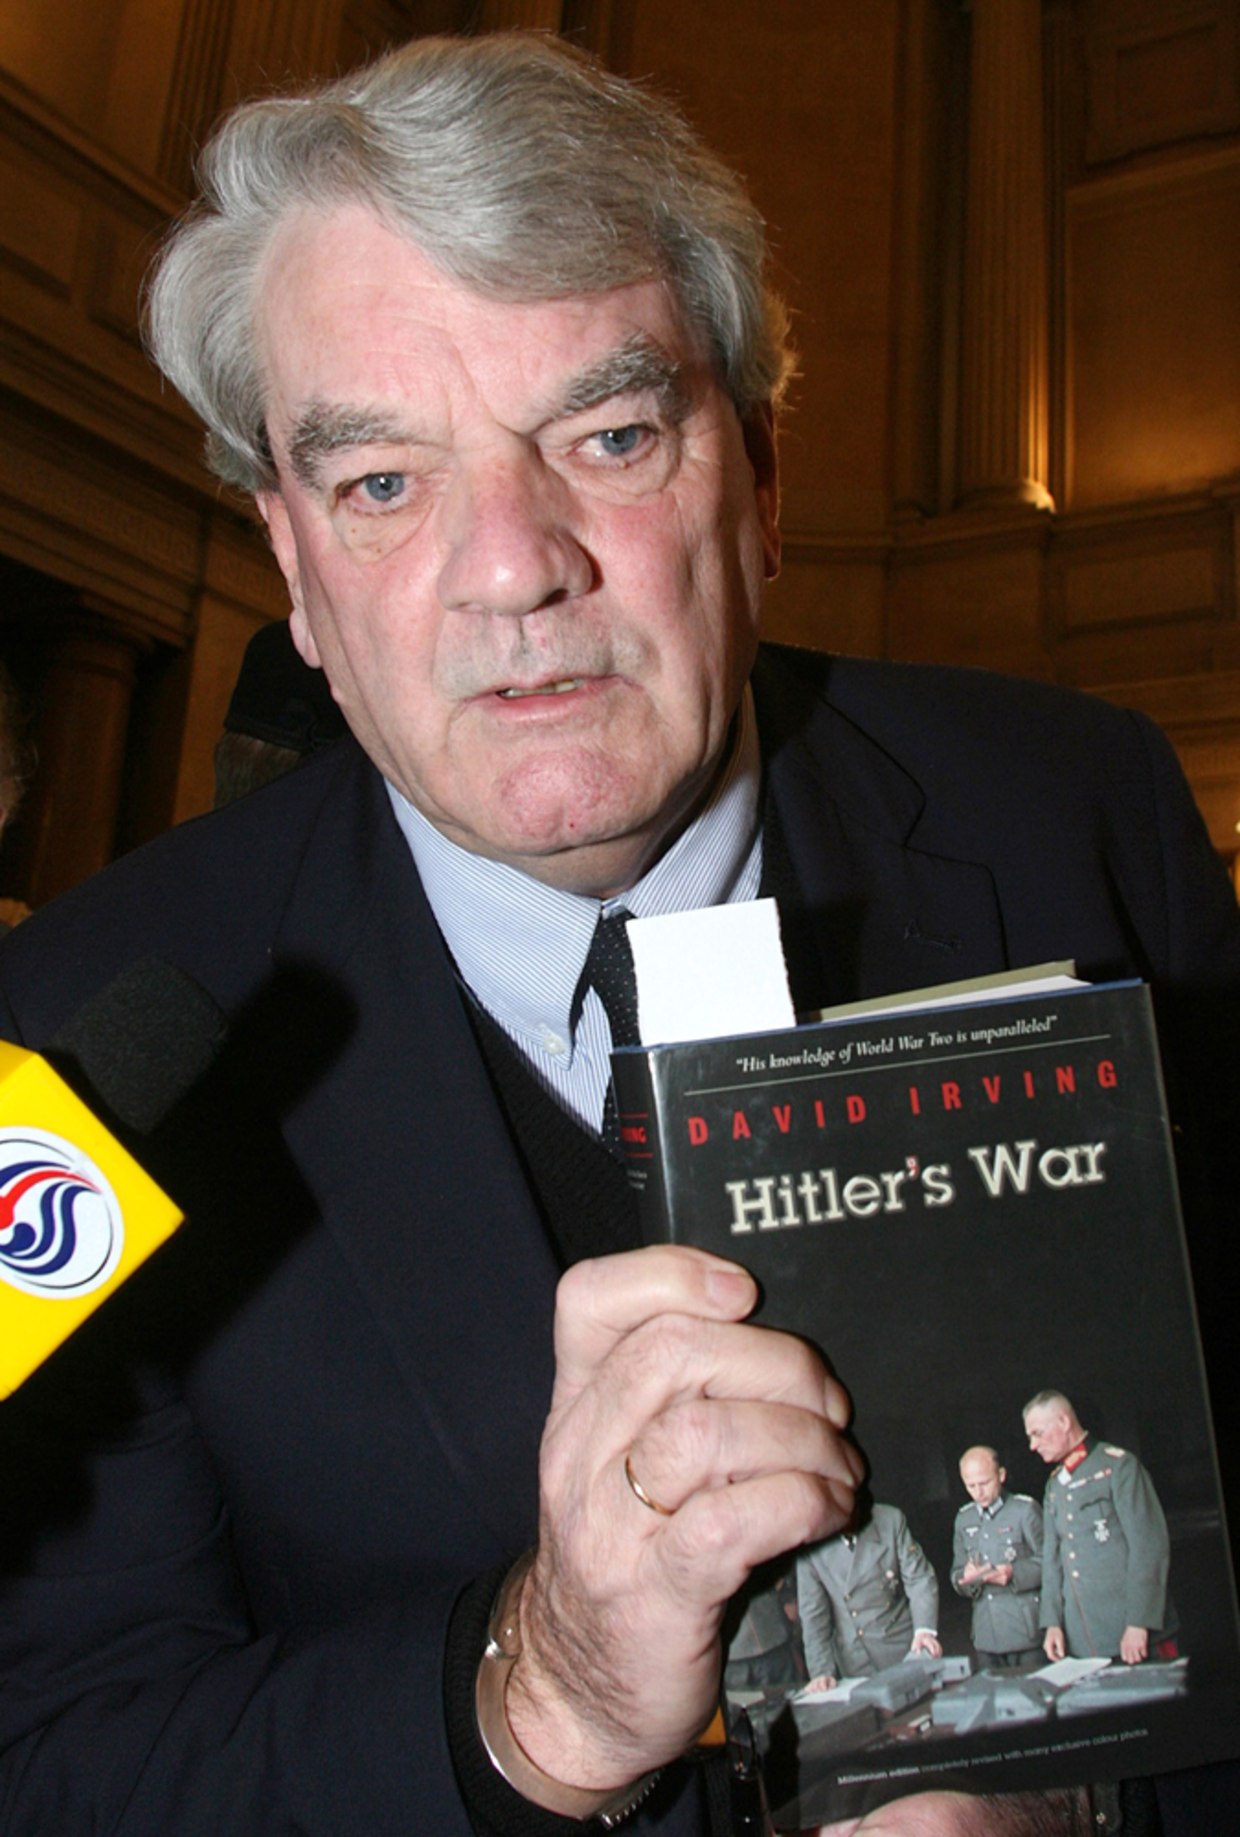  Image 2 of Historical Revisionism Article Author and Holocaust denier David Irving holding a copy of his controversial book 